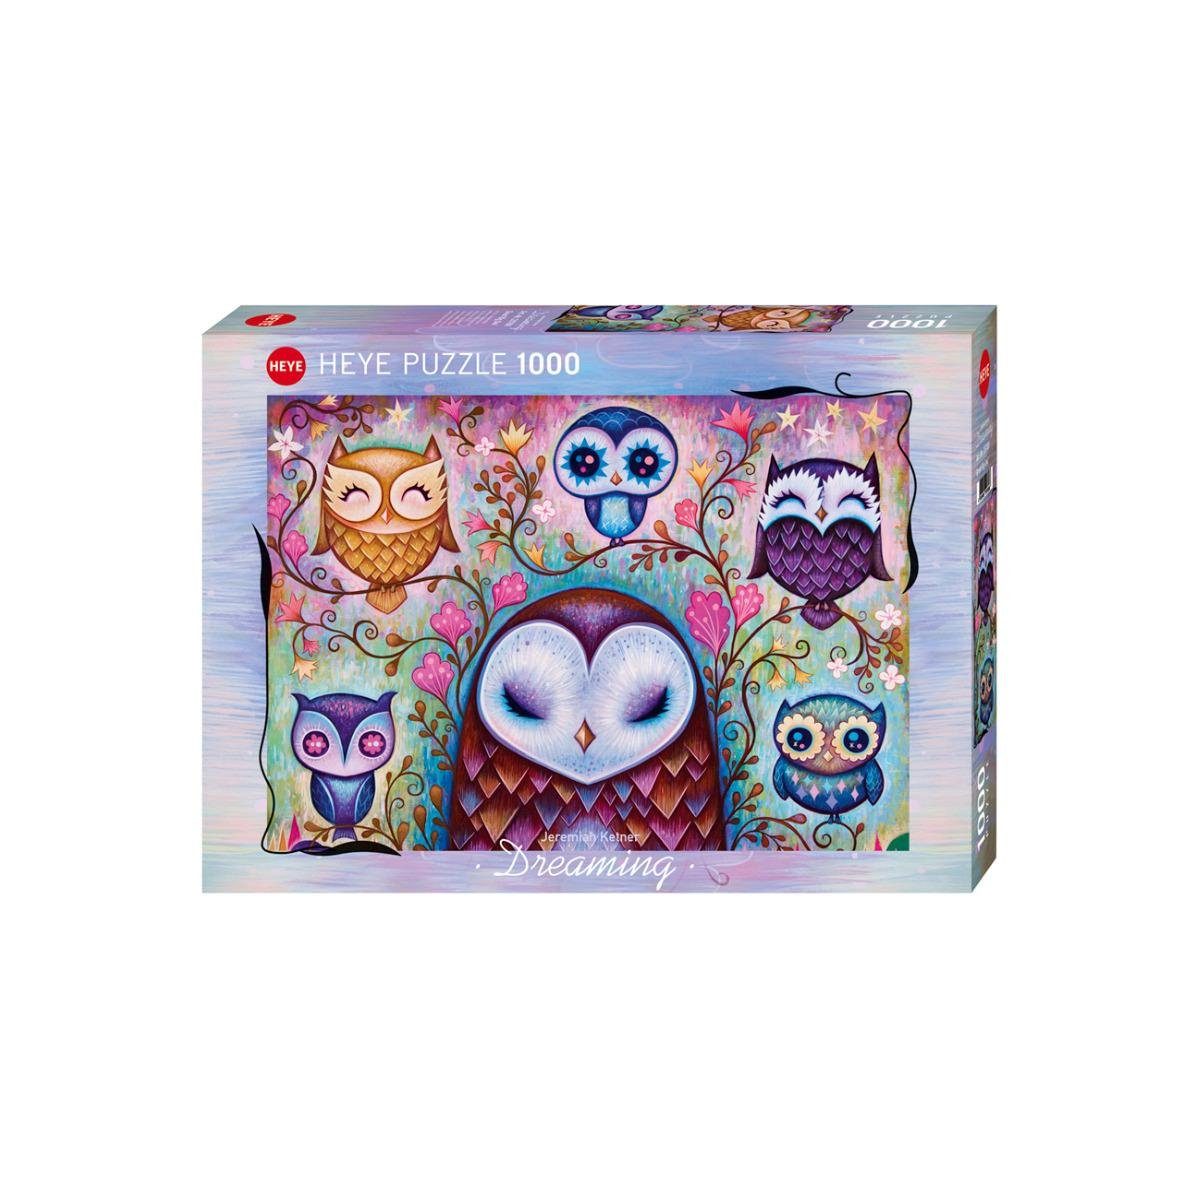 HEYE Puzzle 297688 - Great Big Owl, Dreaming, 1000 Teile -..., 1000 Puzzleteile